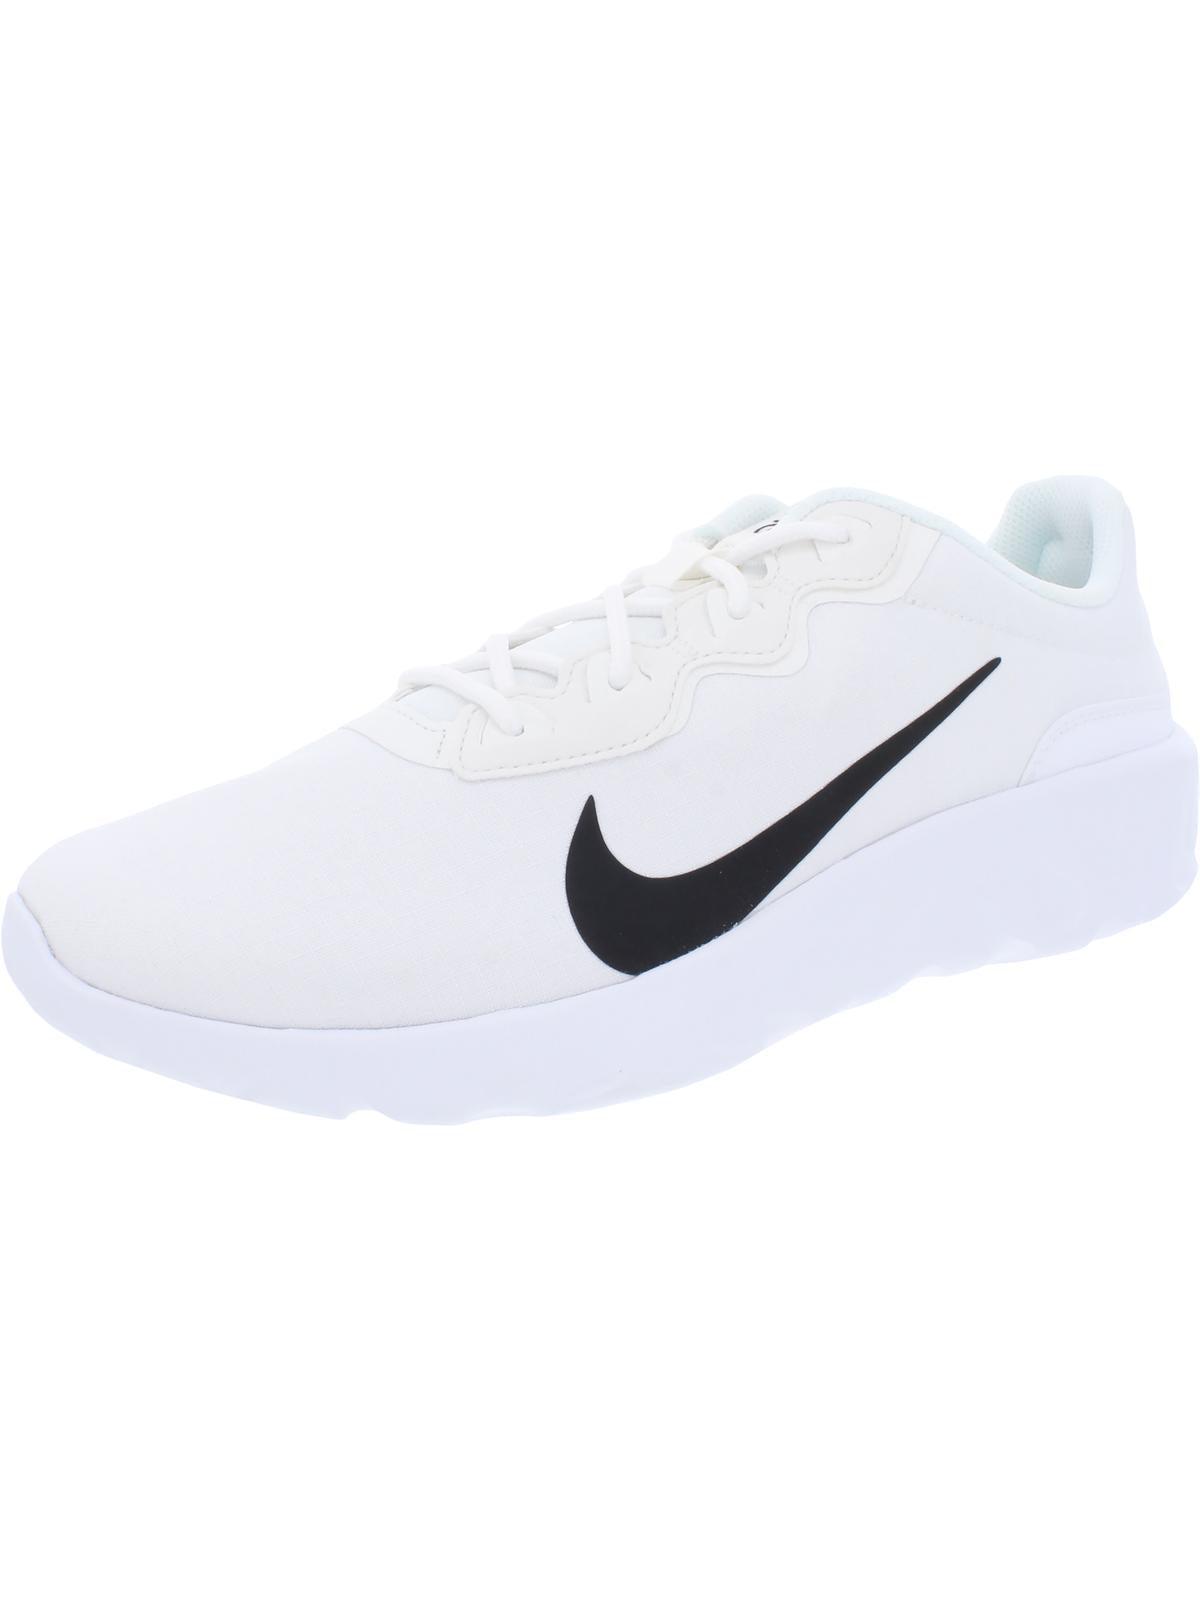 Nike Explore Strada Fitness Performance Running Shoes for Men | Lyst